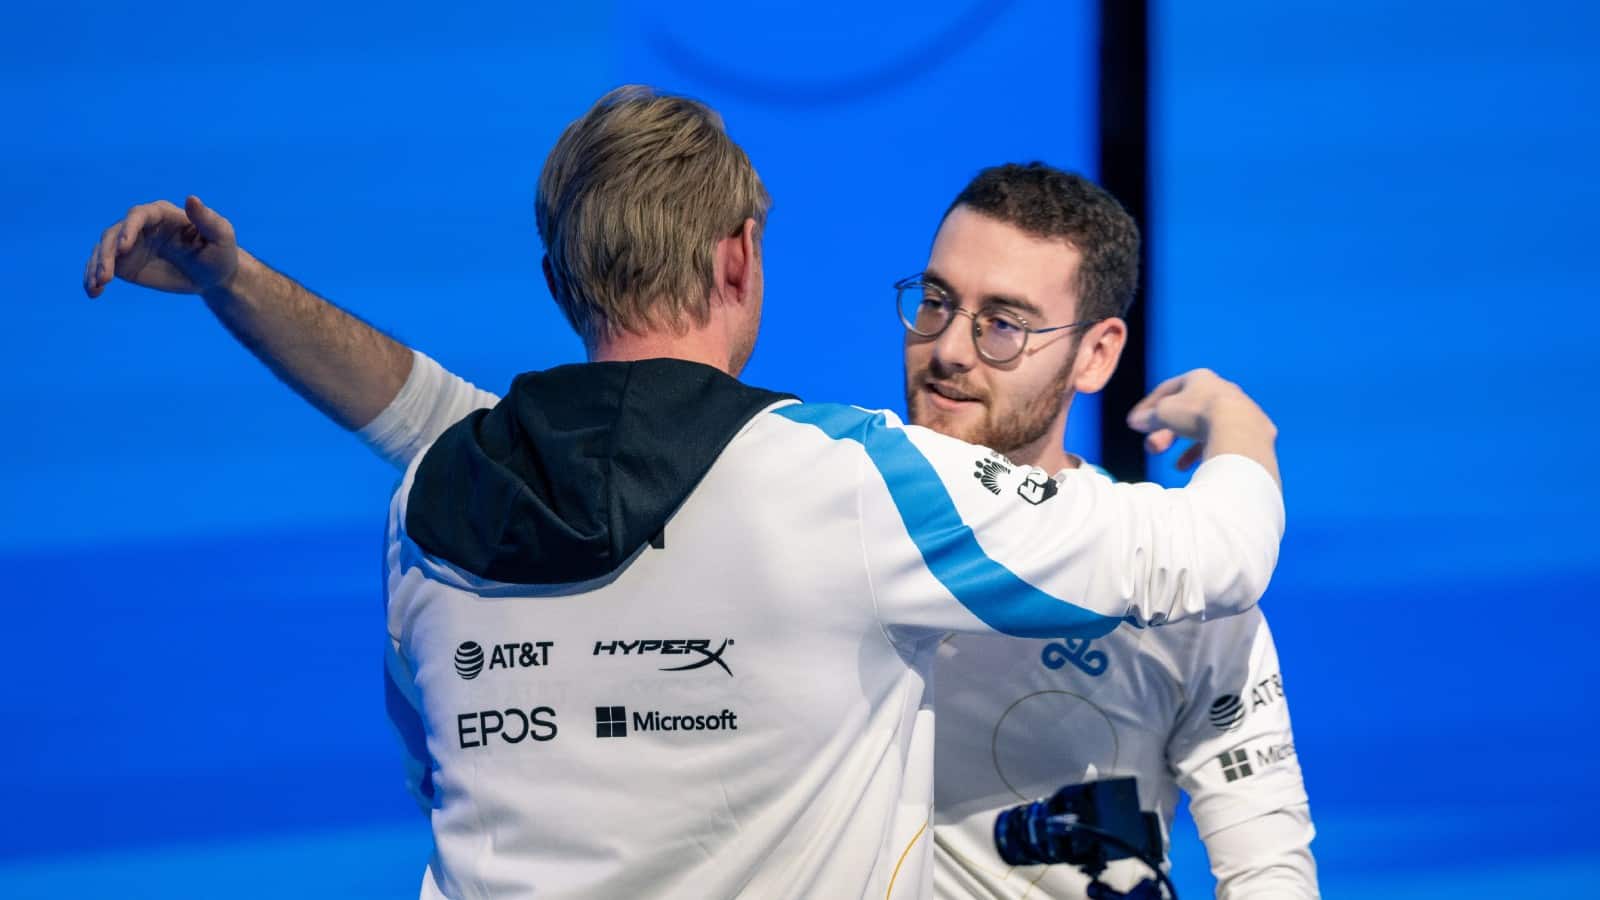 Zven and Vulcan of C9 embrace at Worlds 2021